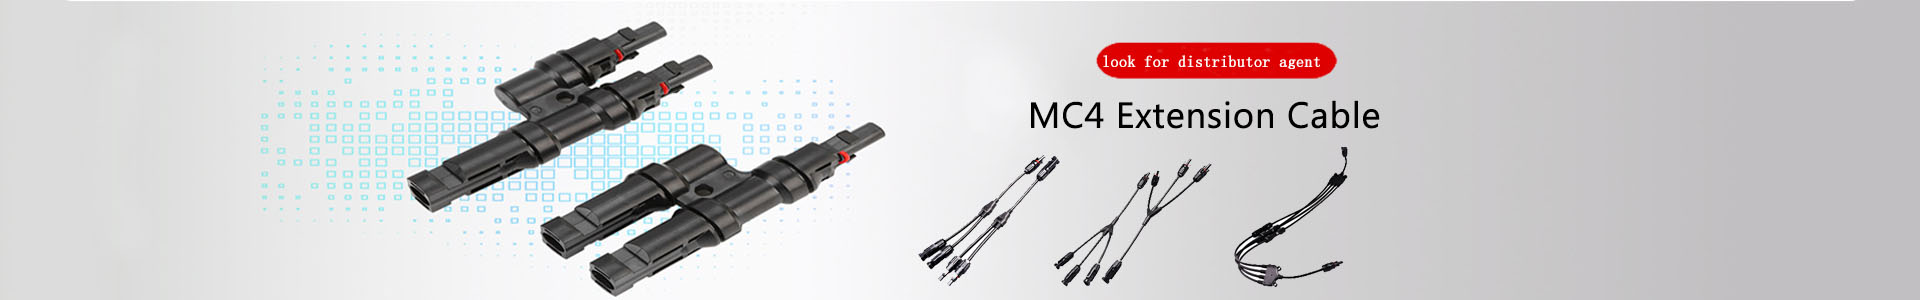 Roof Distributed Solar Project-Solar power plant project-Solar | solar connector,solar branch connector,diode fuse connector,MC4 extnsion cable,H1Z2Z2 solar cable, UL4703 solar cable | Leading manufacturer and supplier of solar pv cables and connectors